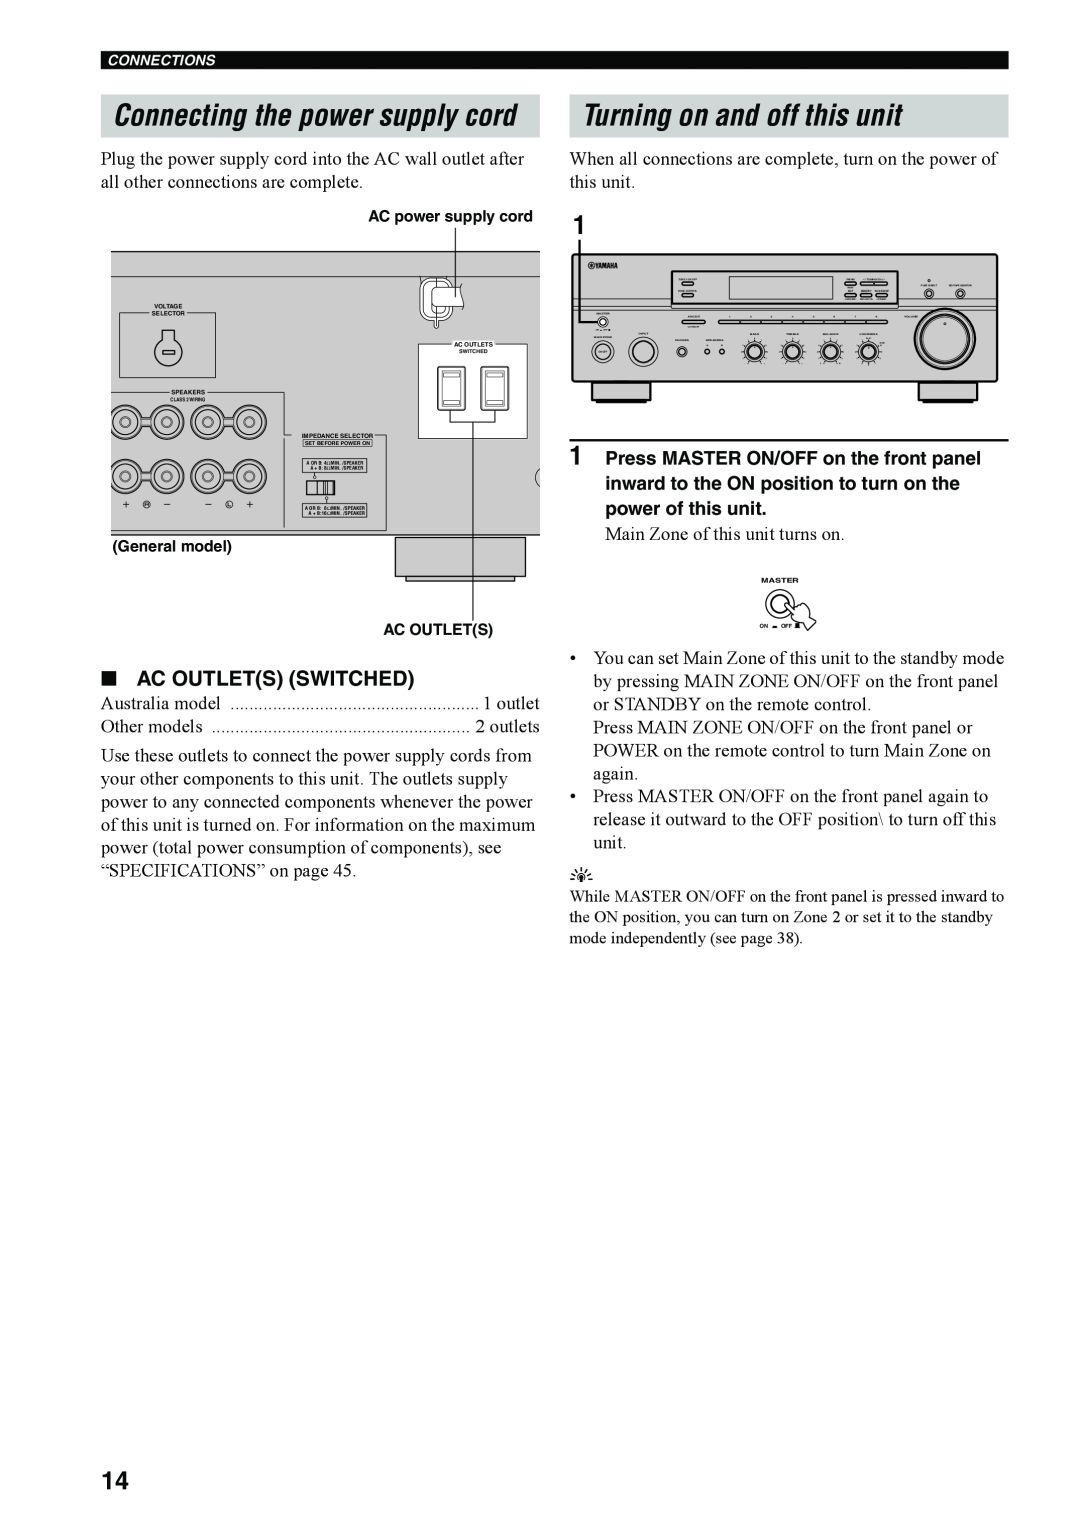 Yamaha RX-497 owner manual Turning on and off this unit, Ac Outlets Switched, Connecting the power supply cord 